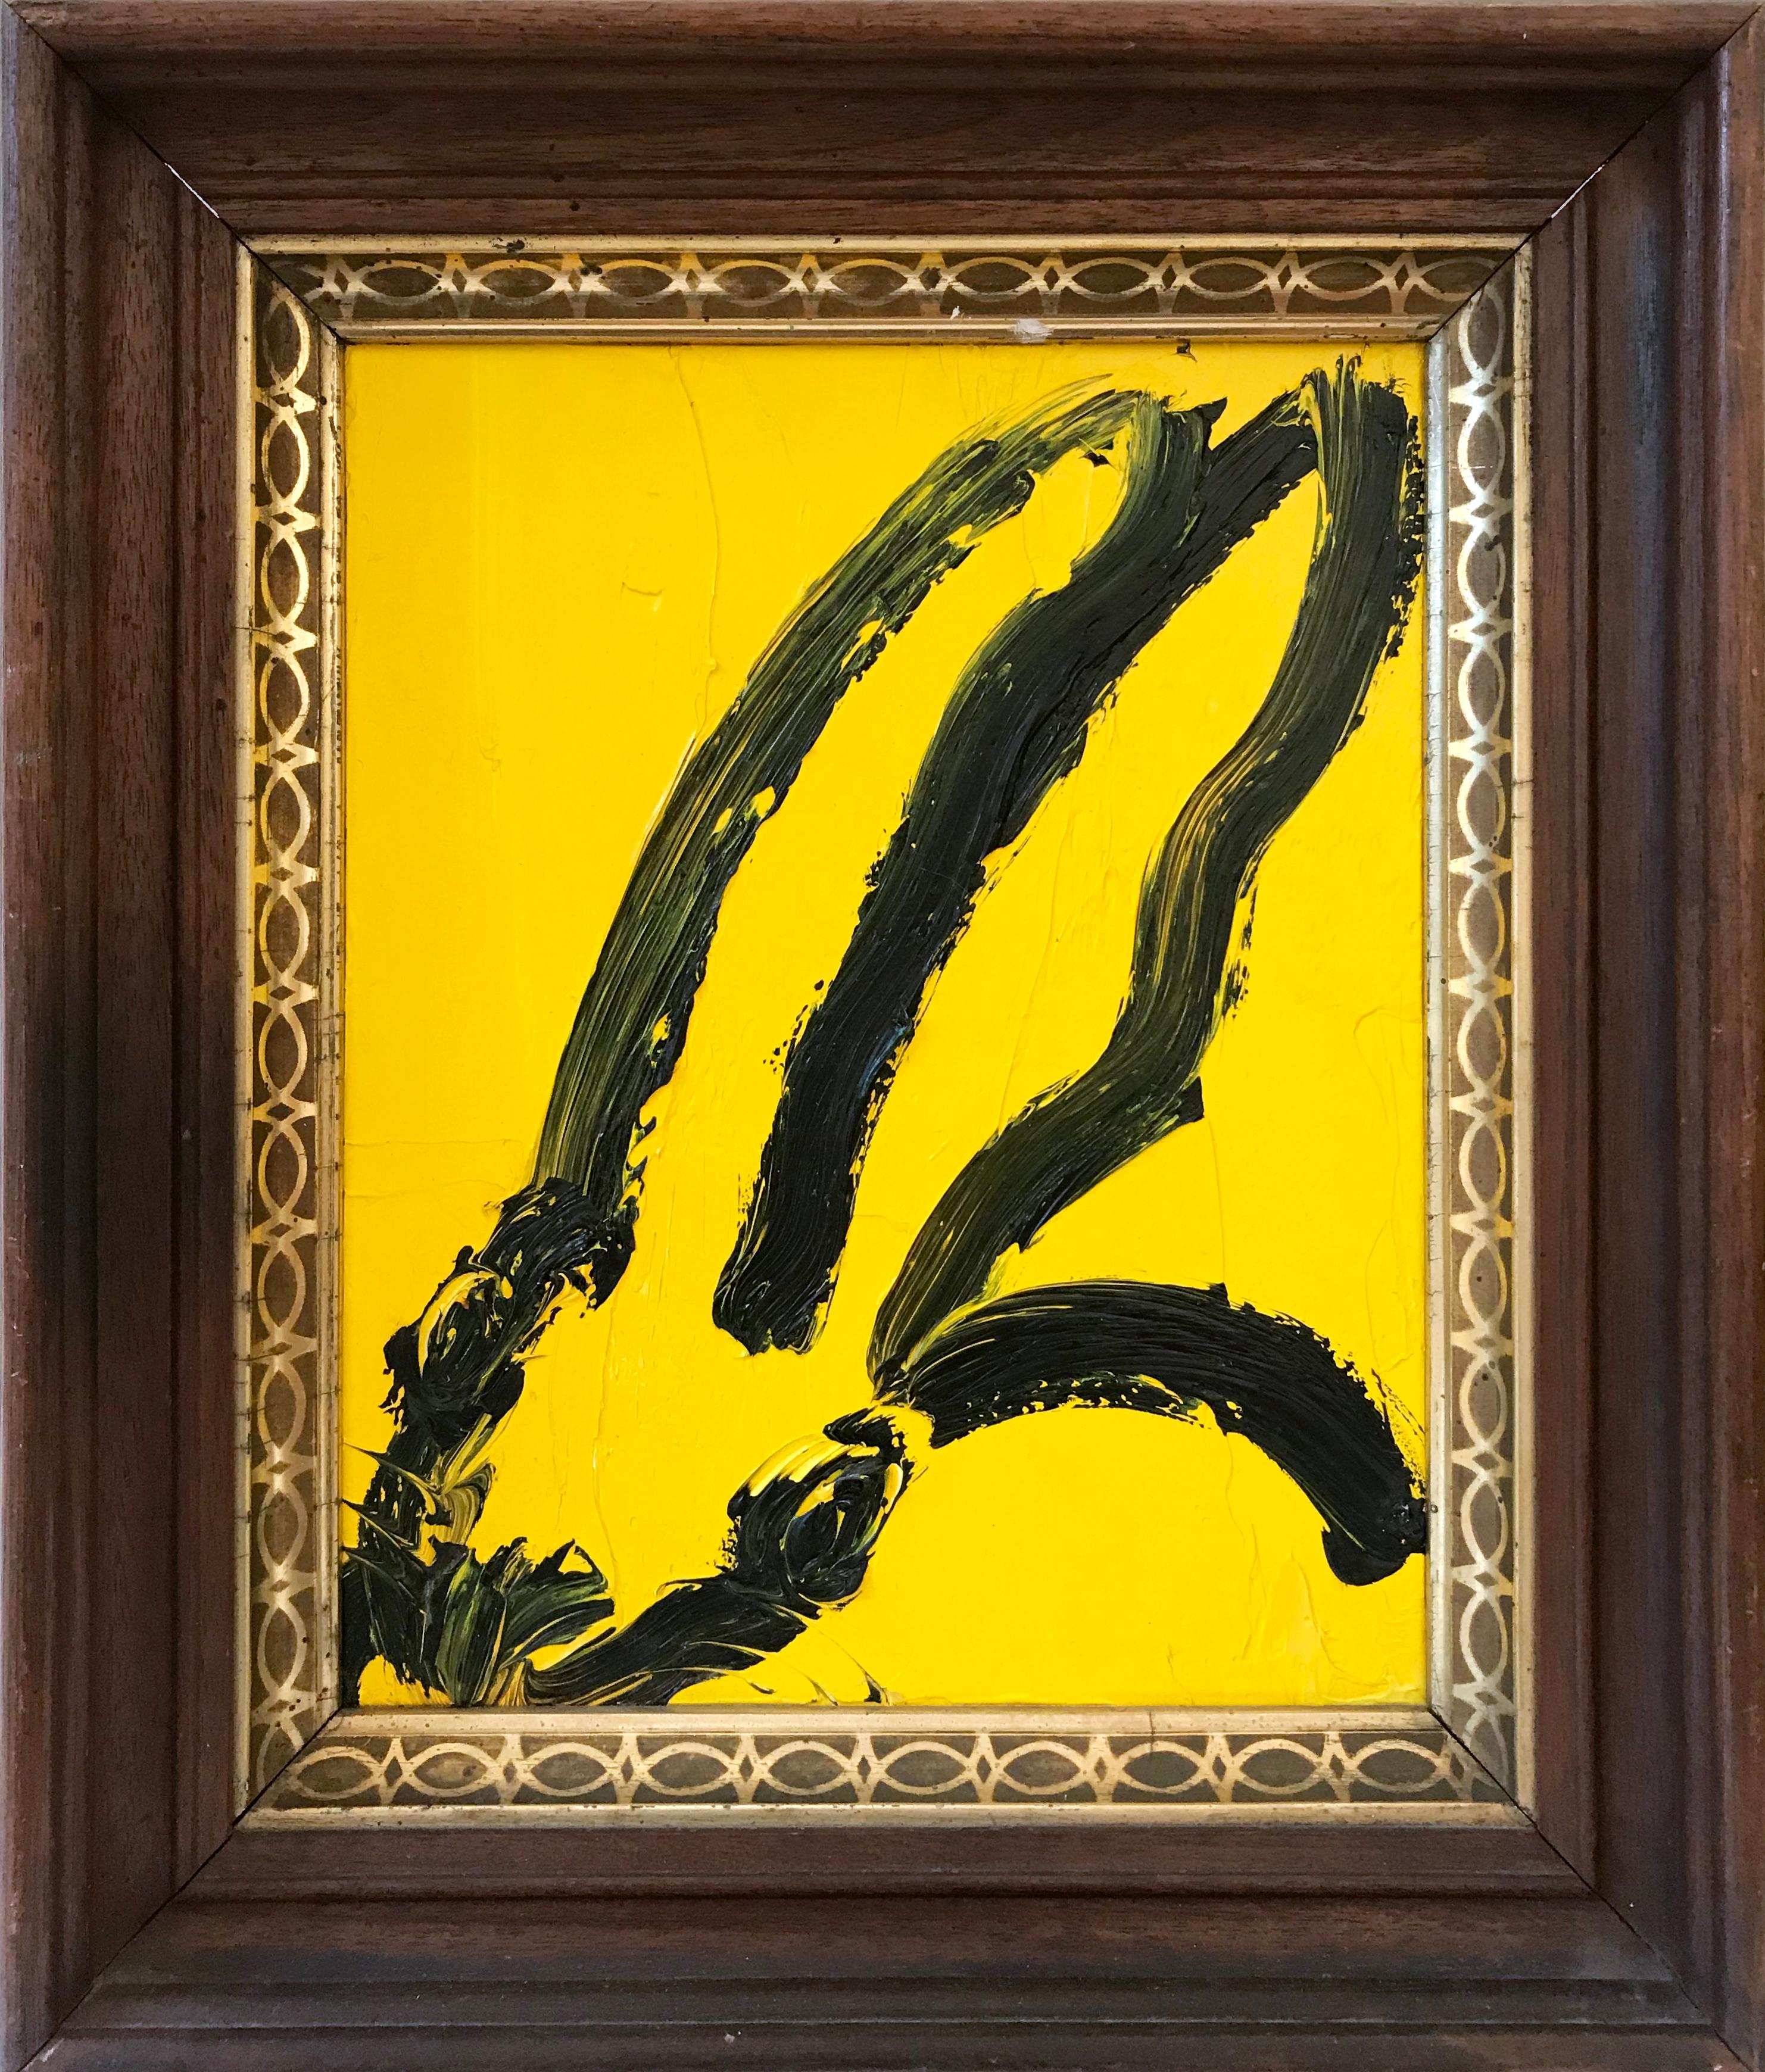 Hunt Slonem Animal Painting - "Untitled (Bunny on Tuscany Yellow)" Oil Painting on Wood Panel